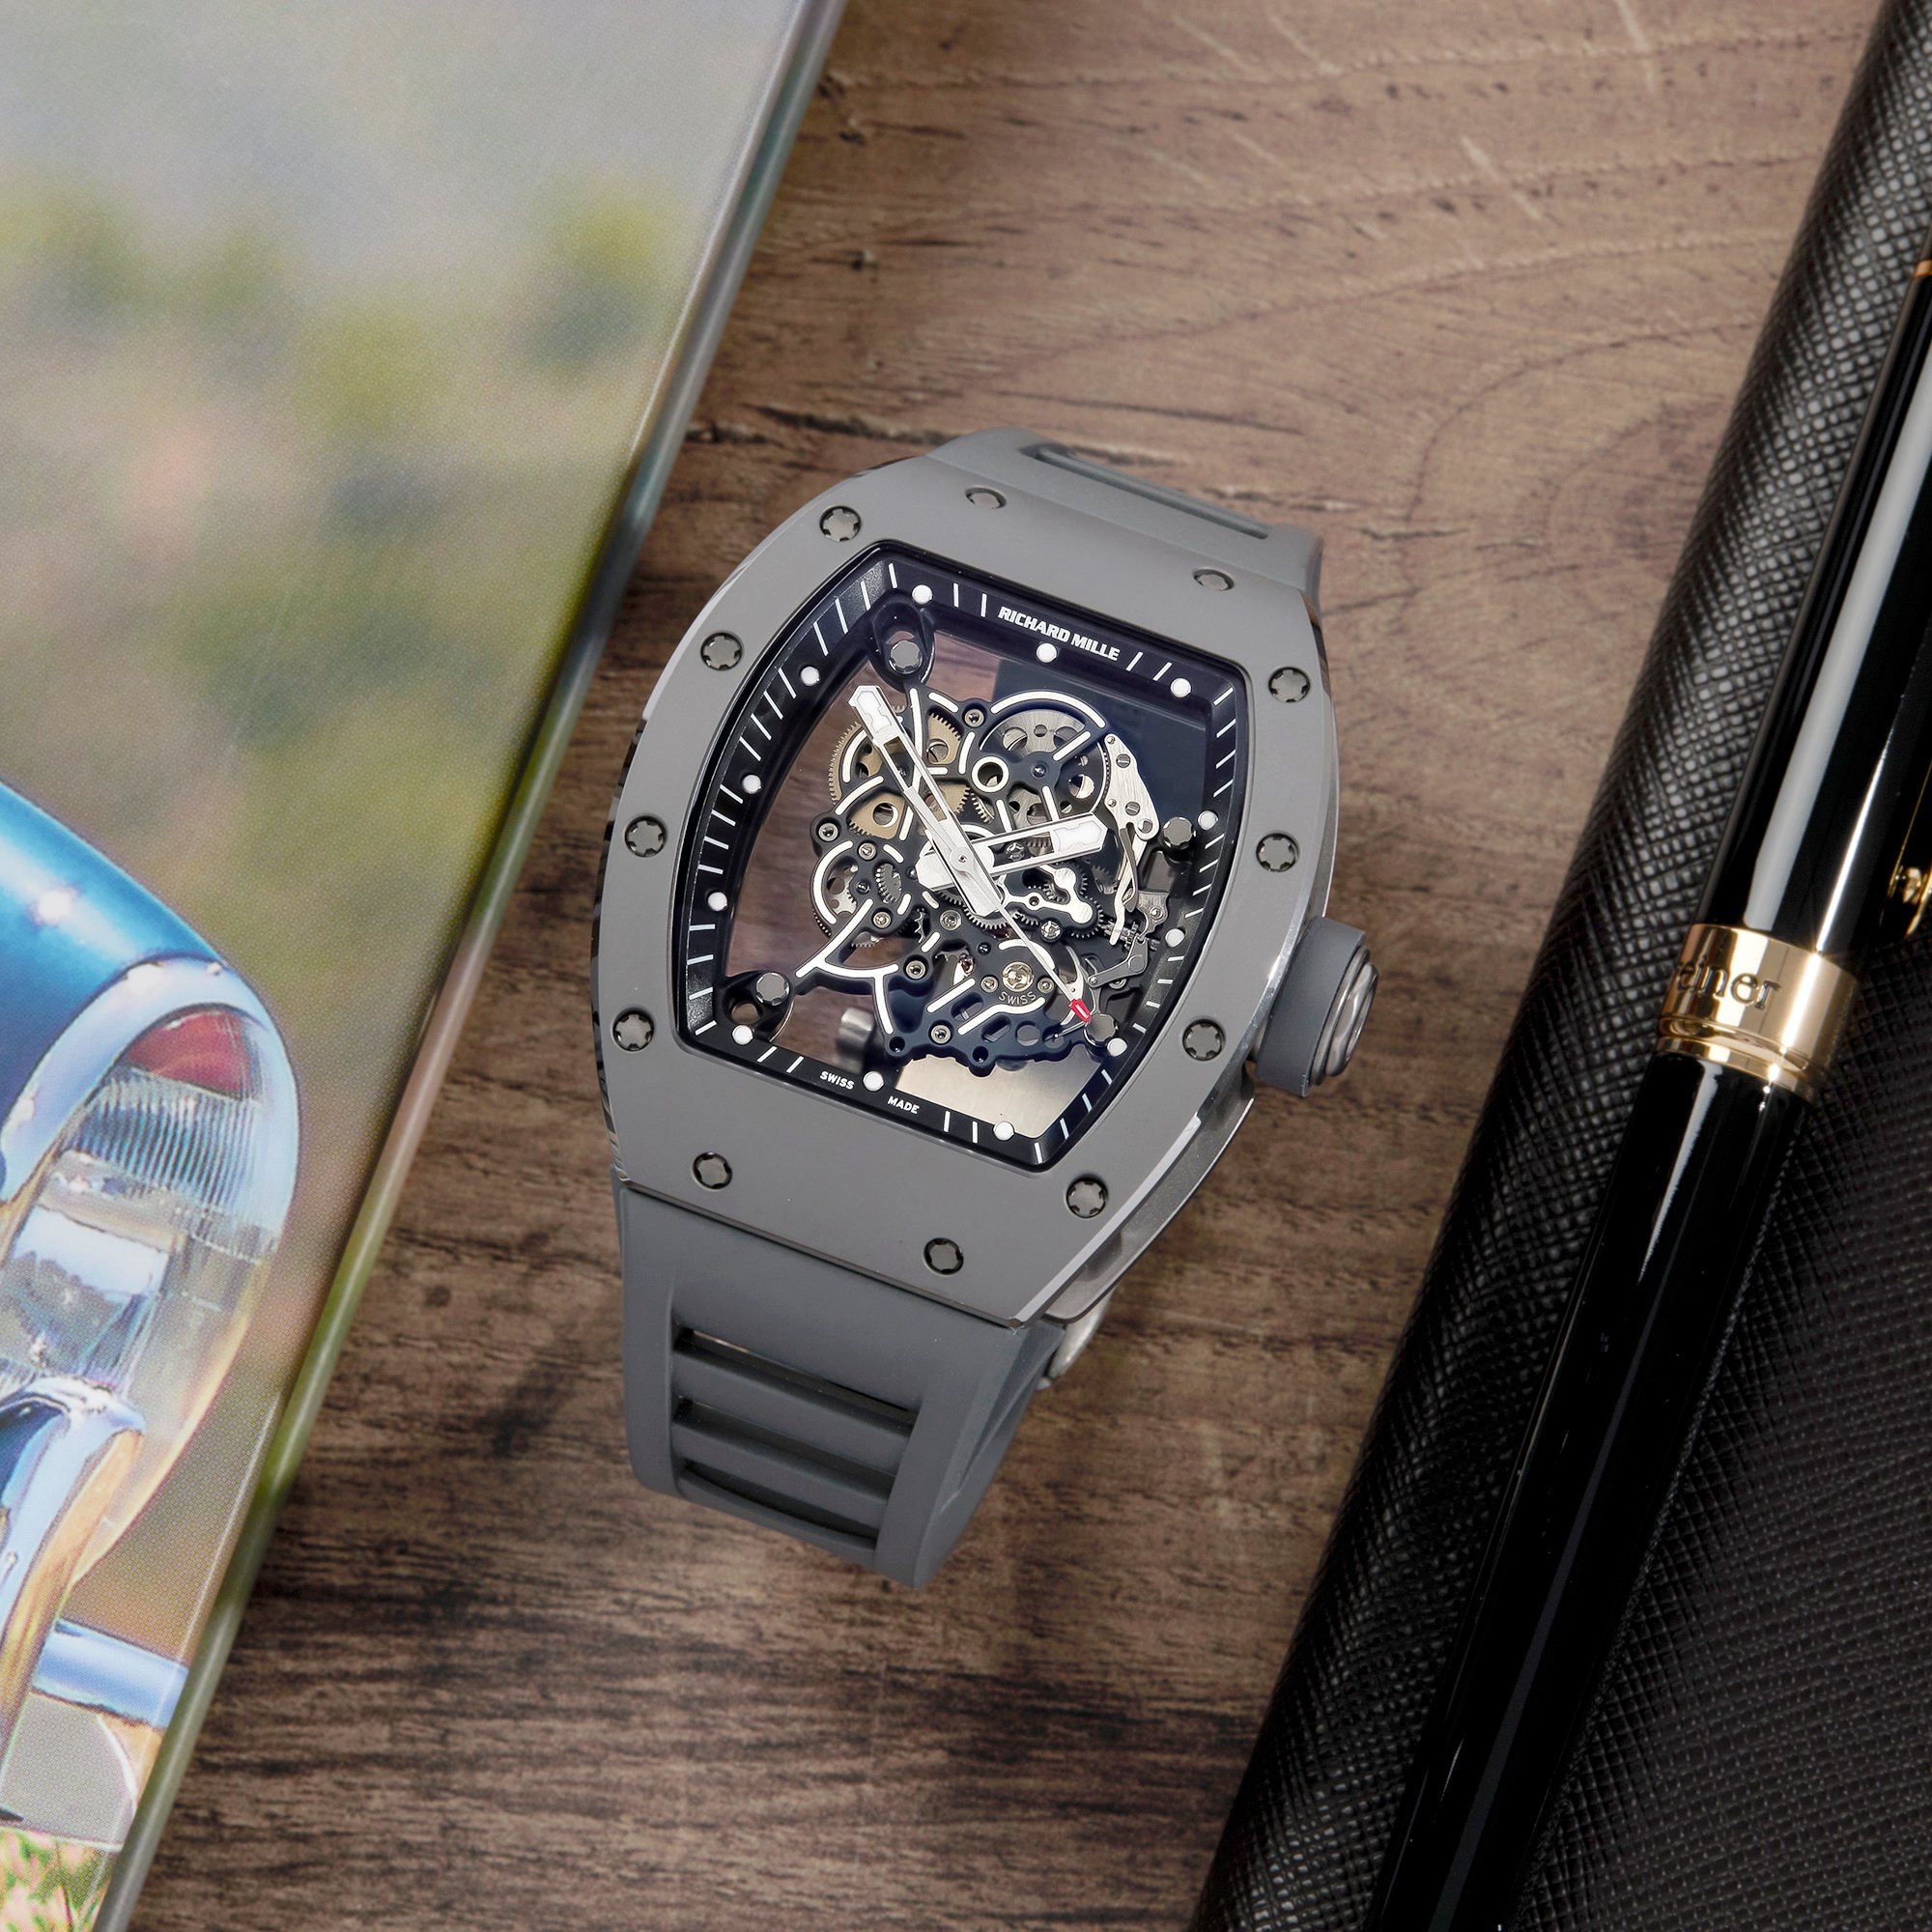 Richard Mille RM055 Bubba Watson Grey Boutique Limited Edition Of 50 Pieces Titanium RM055